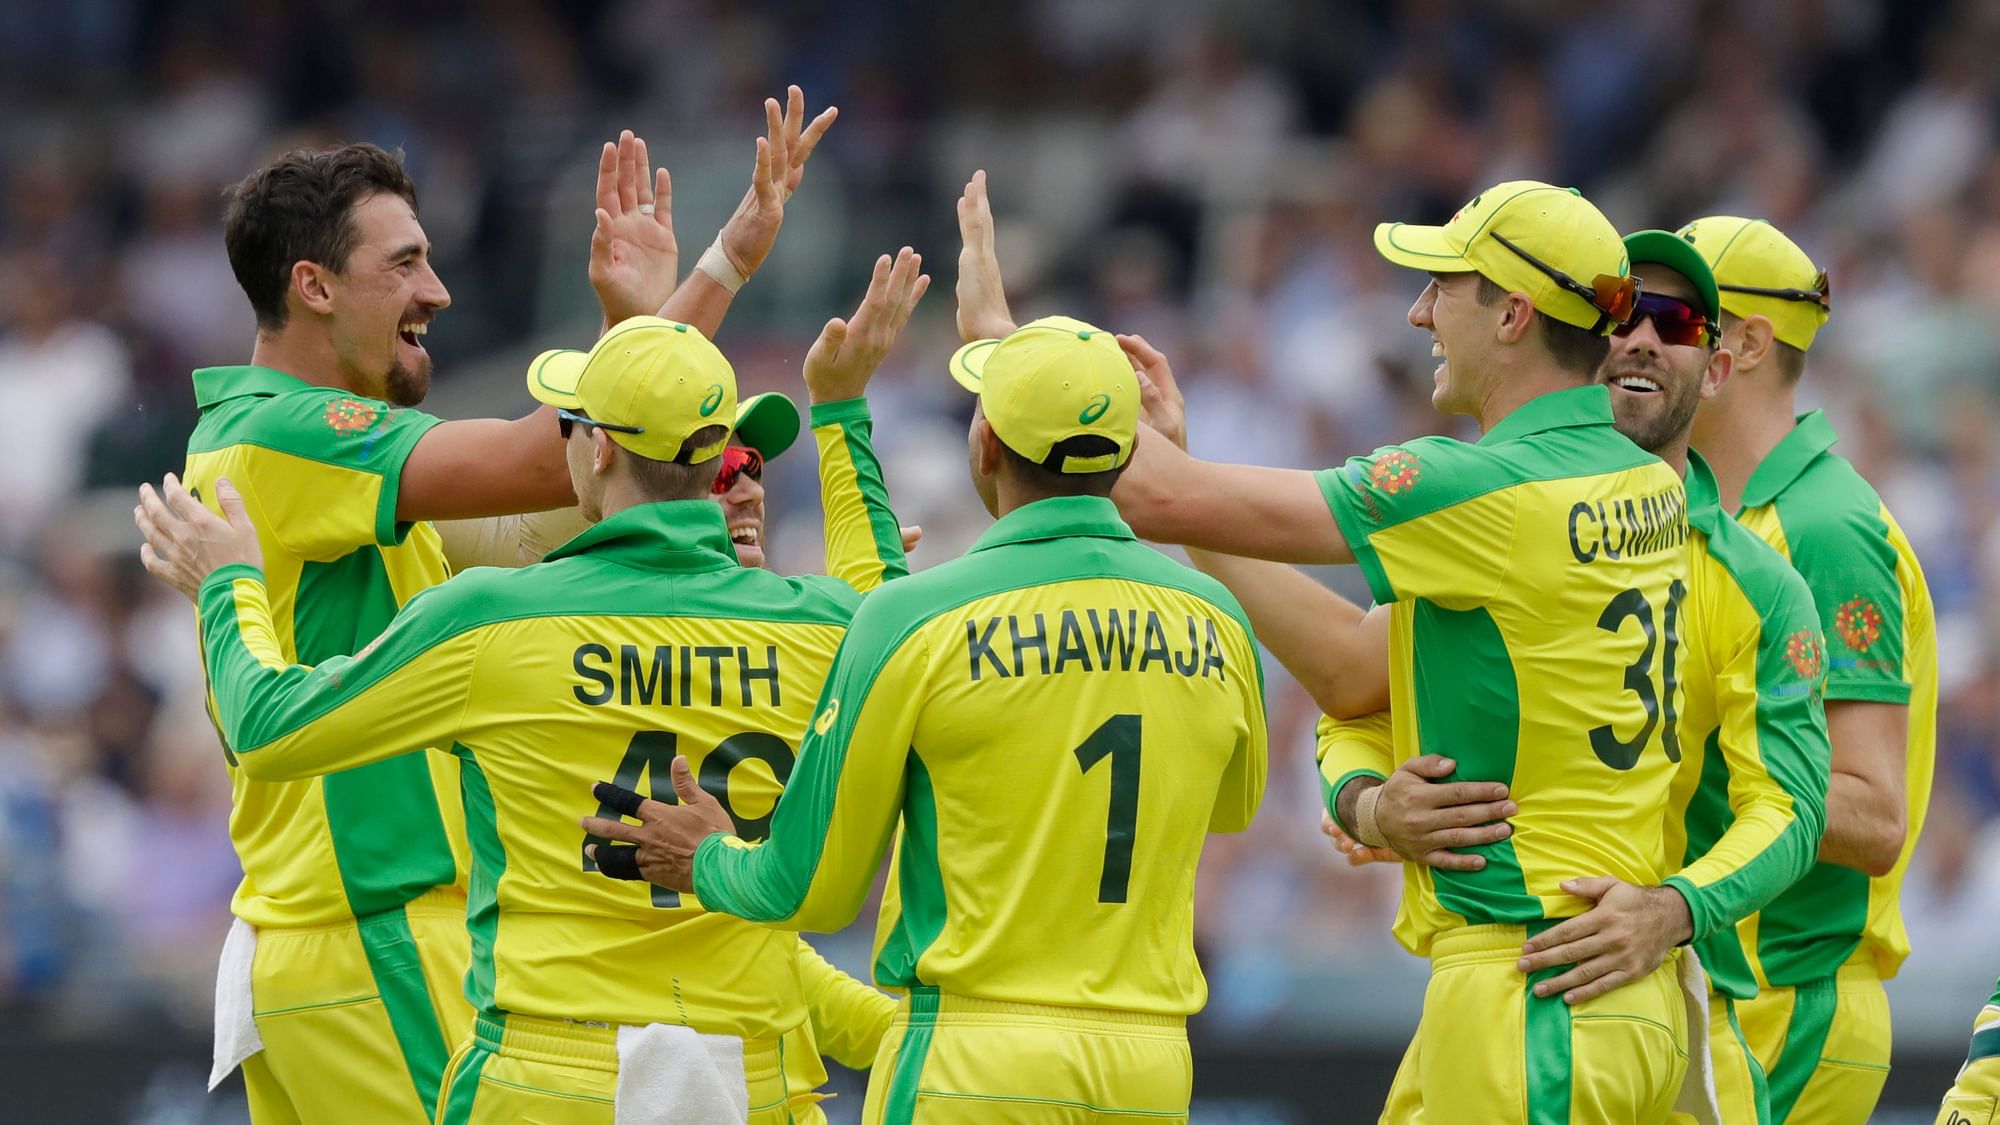 Mitchell Starc picked up four wickets as Australia beat England by 62 runs.